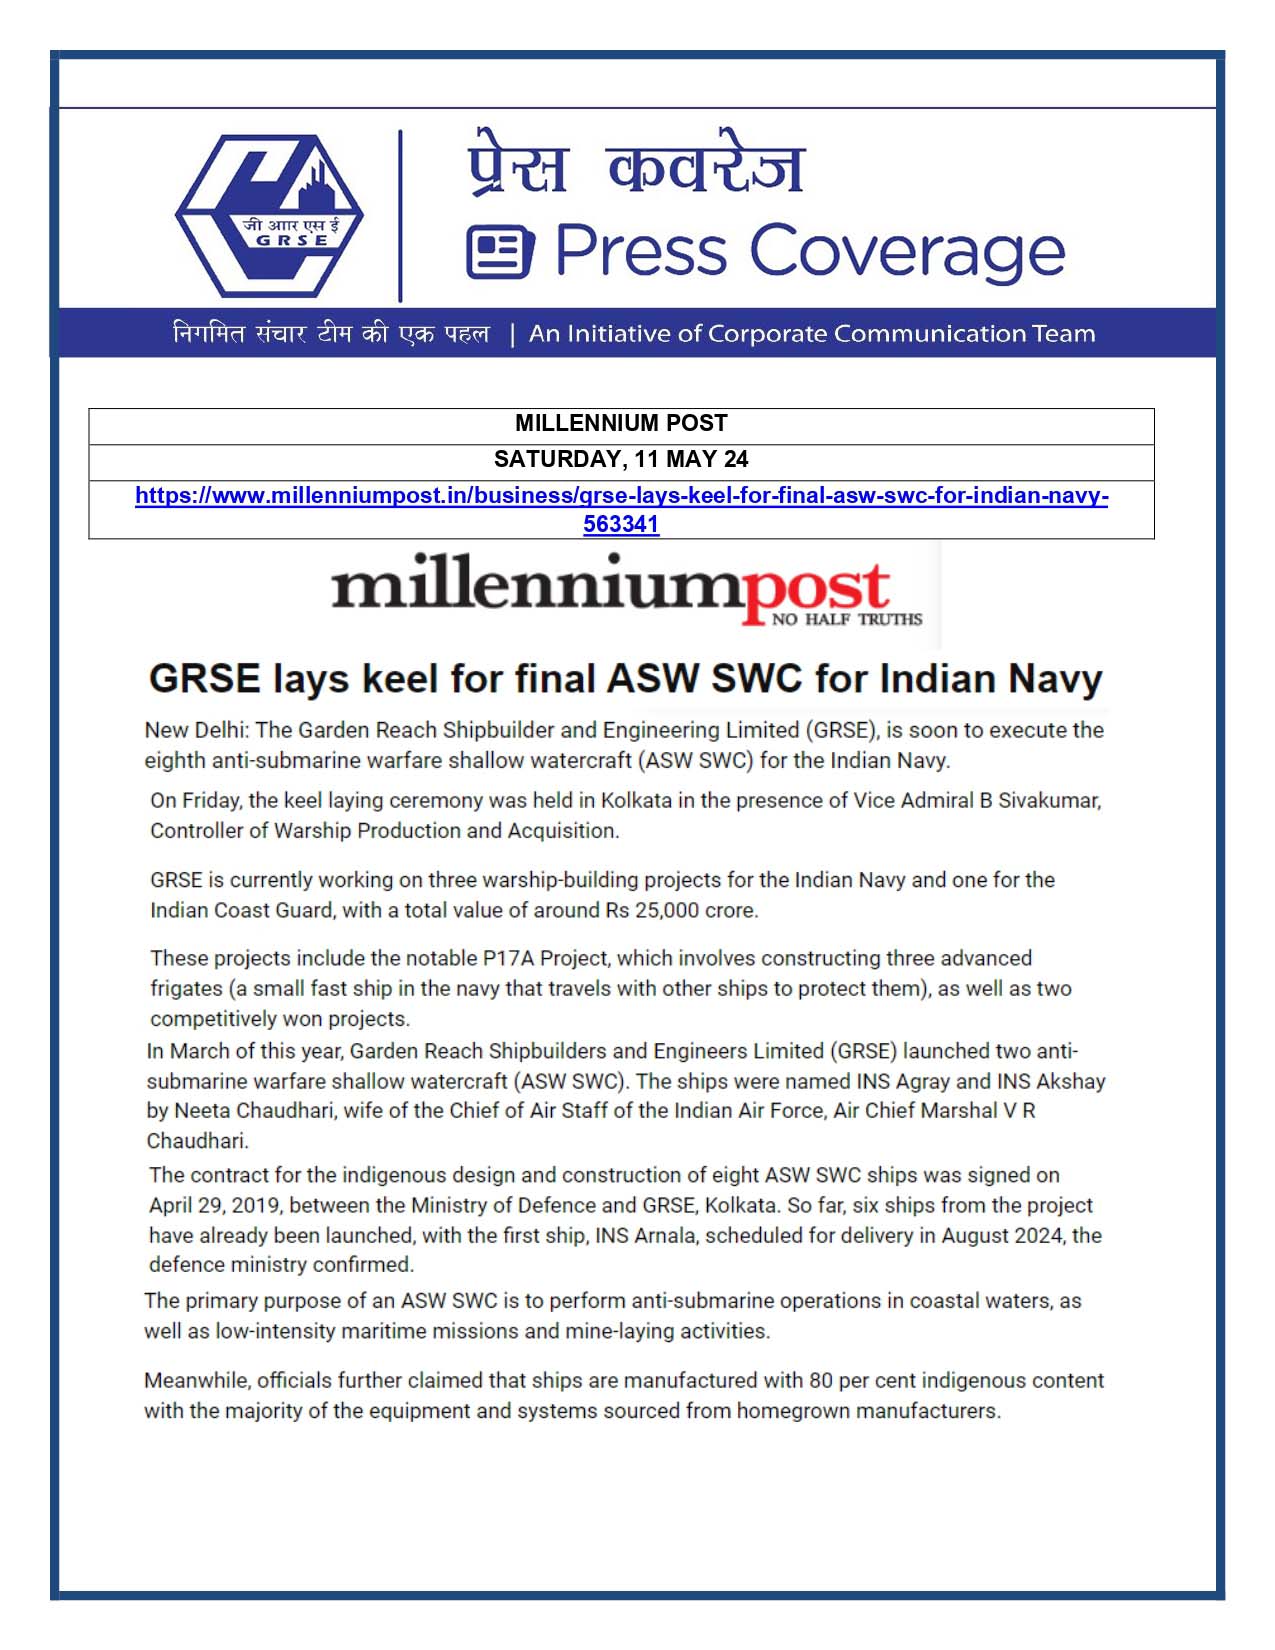 Press Coverage : Millennium Post, 11 May 24 : GRSE Lays Keel for final ASW SWC for Indian Navy